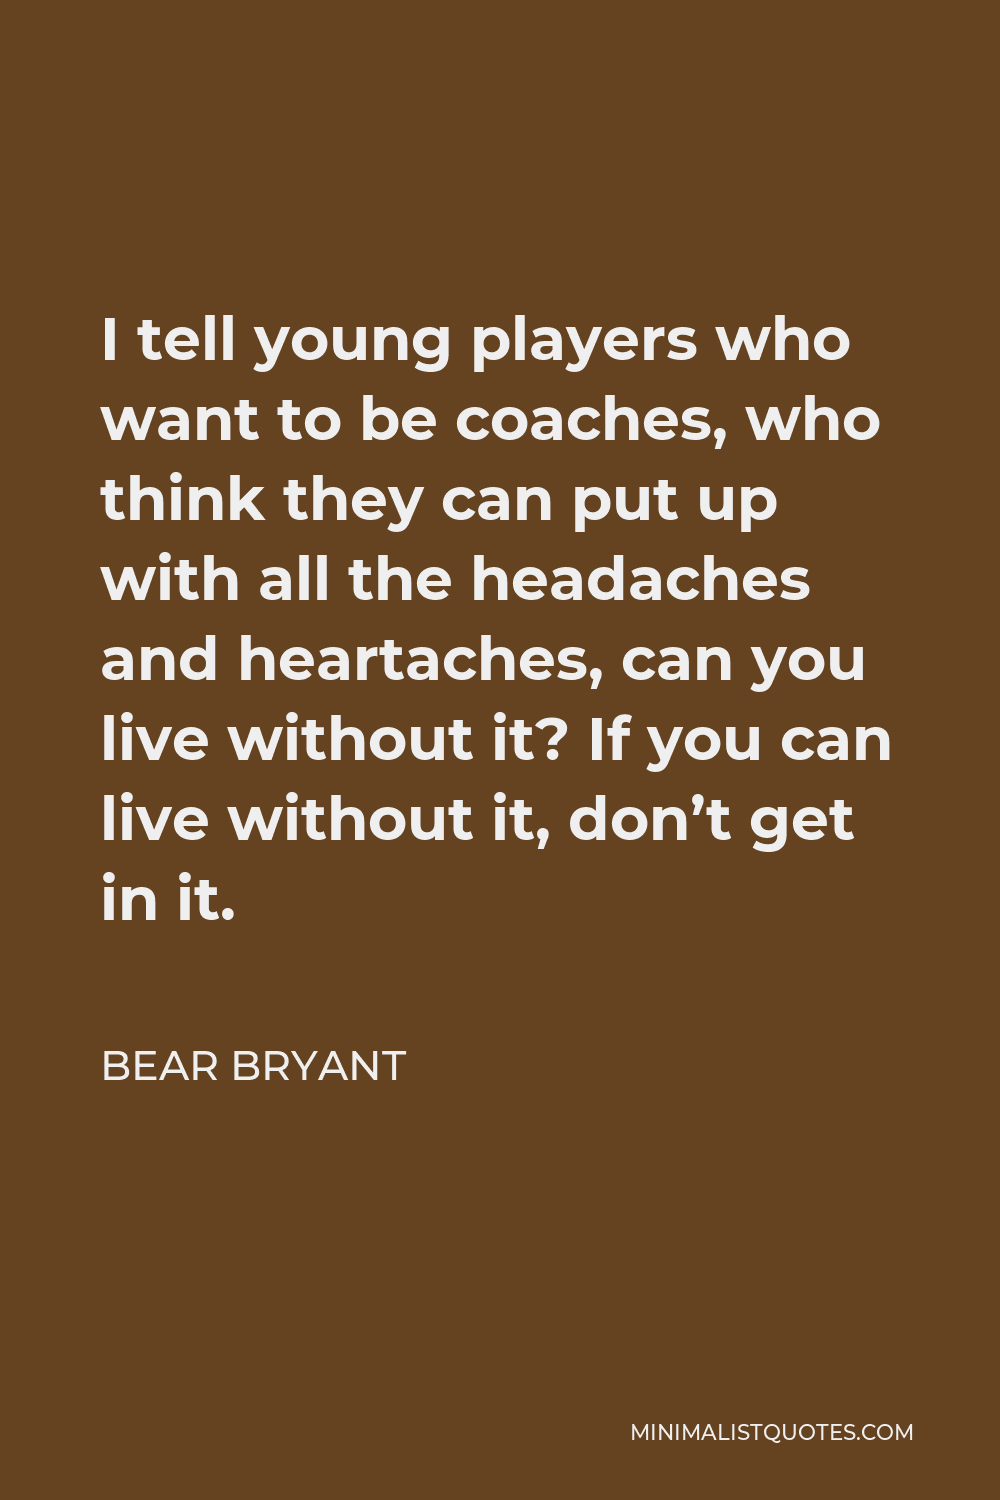 Bear Bryant Quote - I tell young players who want to be coaches, who think they can put up with all the headaches and heartaches, can you live without it? If you can live without it, don’t get in it.